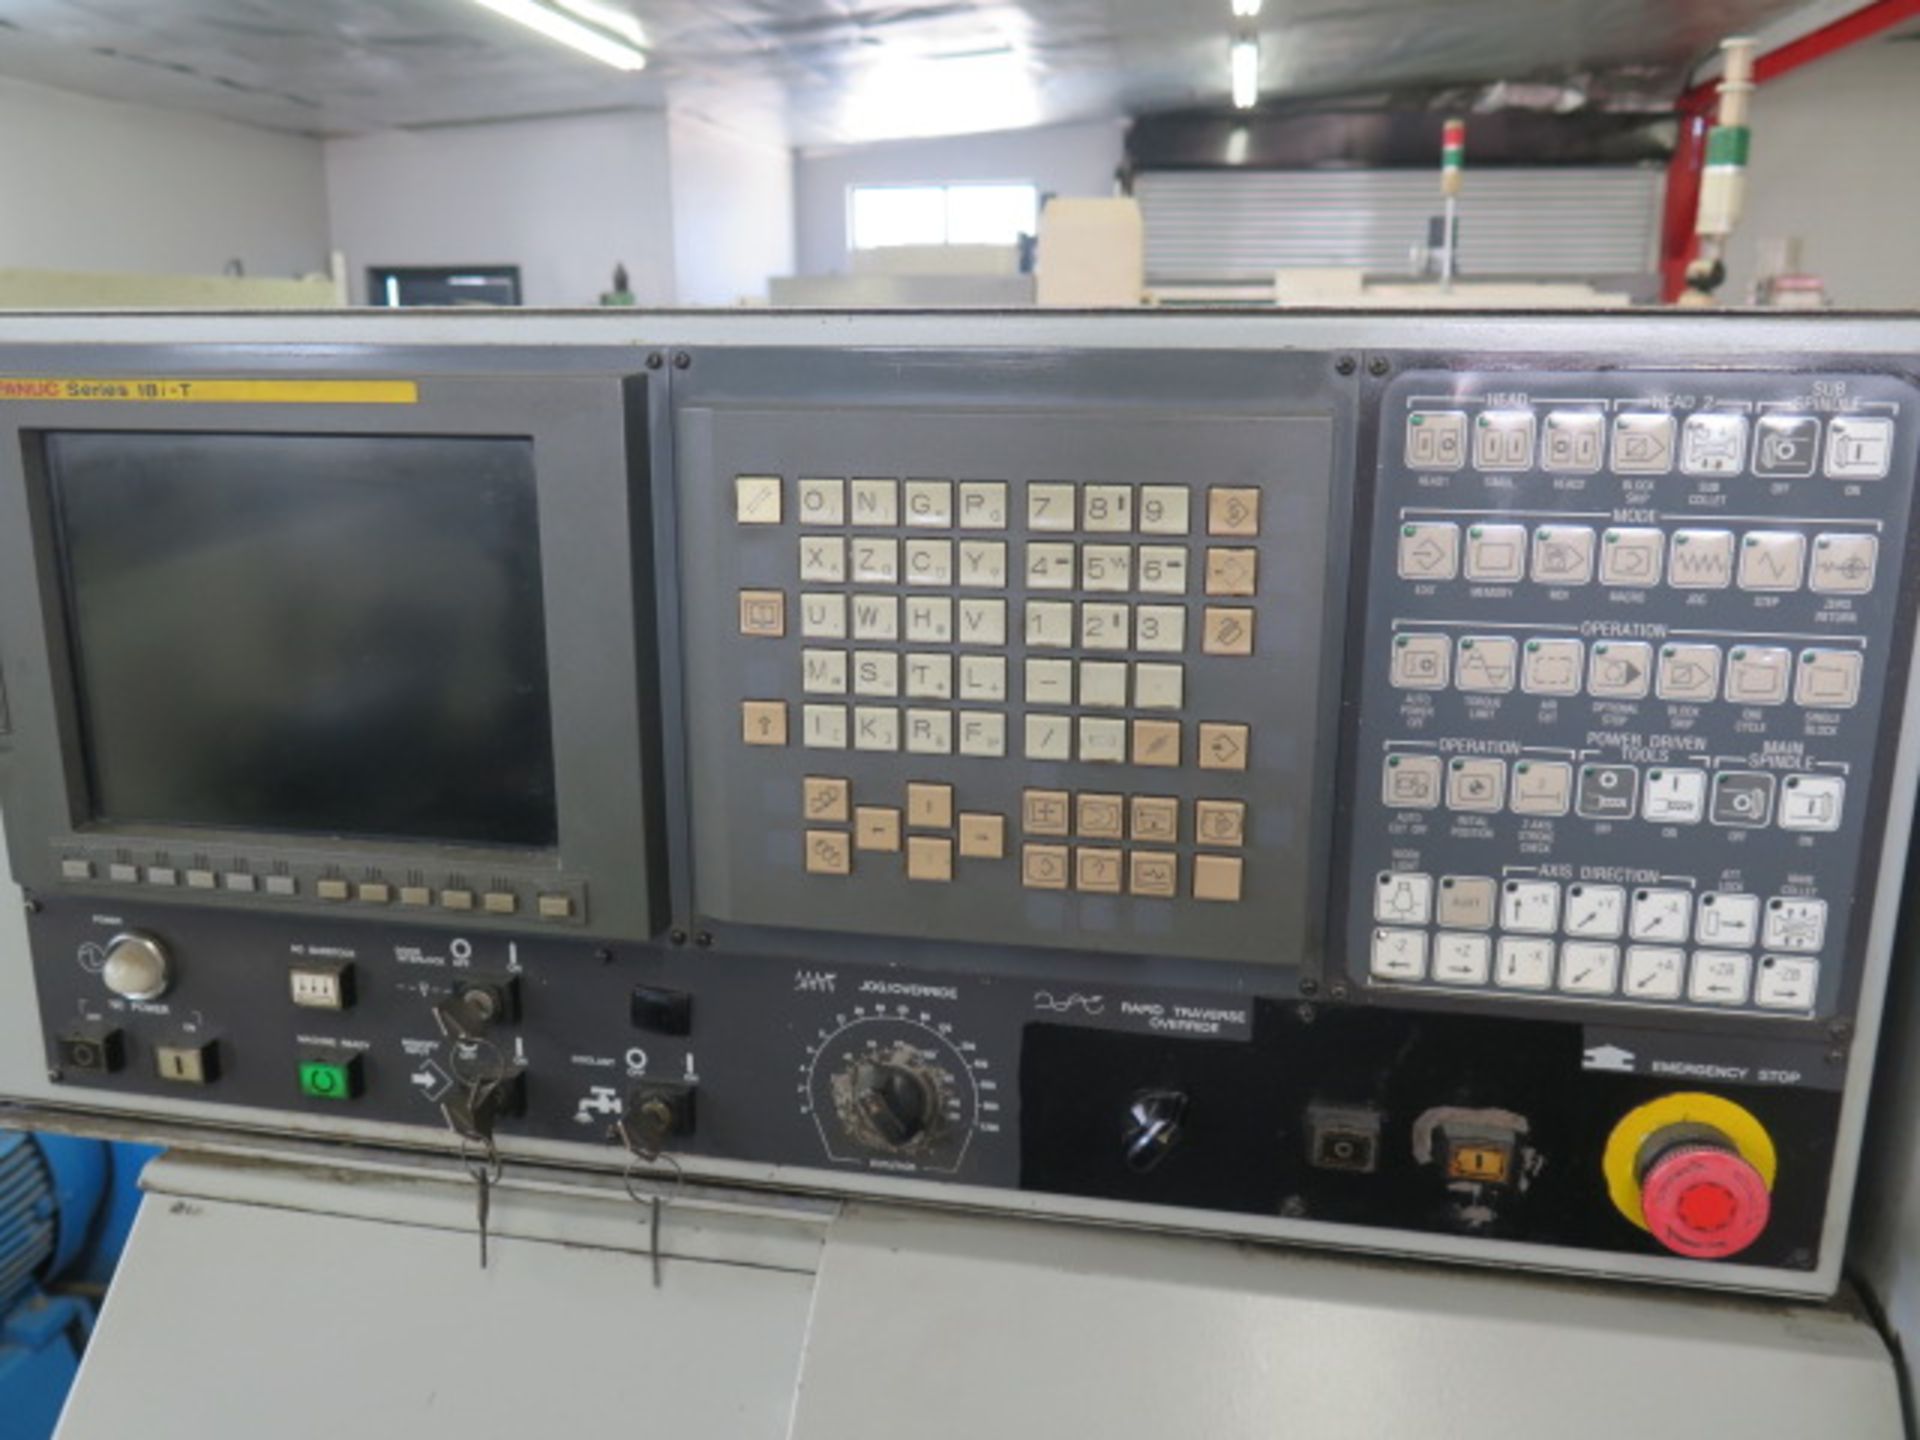 Star SA-16R Twin Spindle CNC Screw Machine s/n 0065(002) w/ Fanuc Series 18i-T Controls Sold AS IS - Image 4 of 14